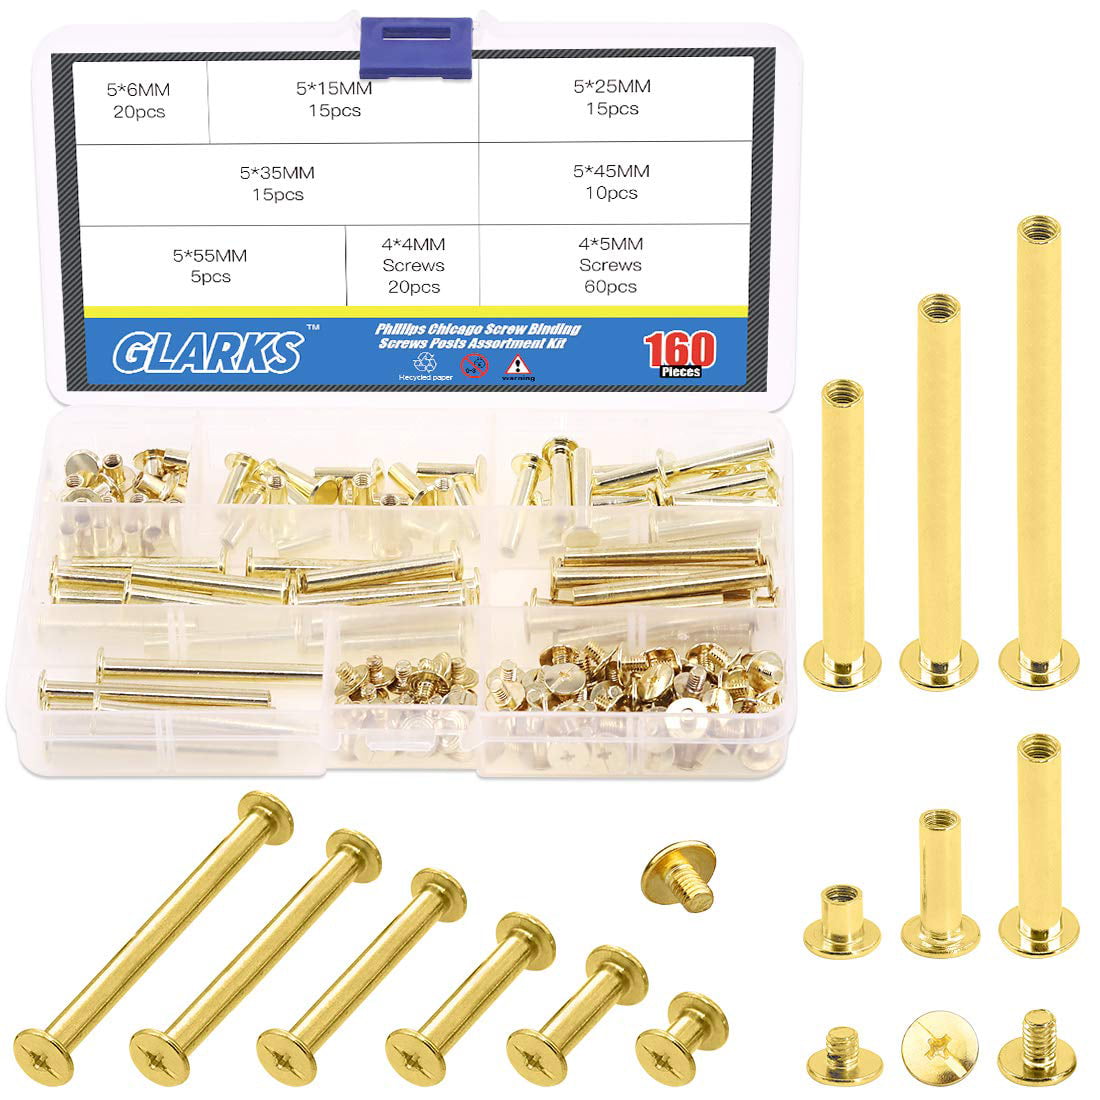 M5 x 20mm-50Sets Leather Repair Hilitchi 50 Sets M5 x 5/10 15/25 35/45 Phillips Chicago Screw Posts Binding Screws Assortment Kit for Scrapbook Photo Albums Binding 